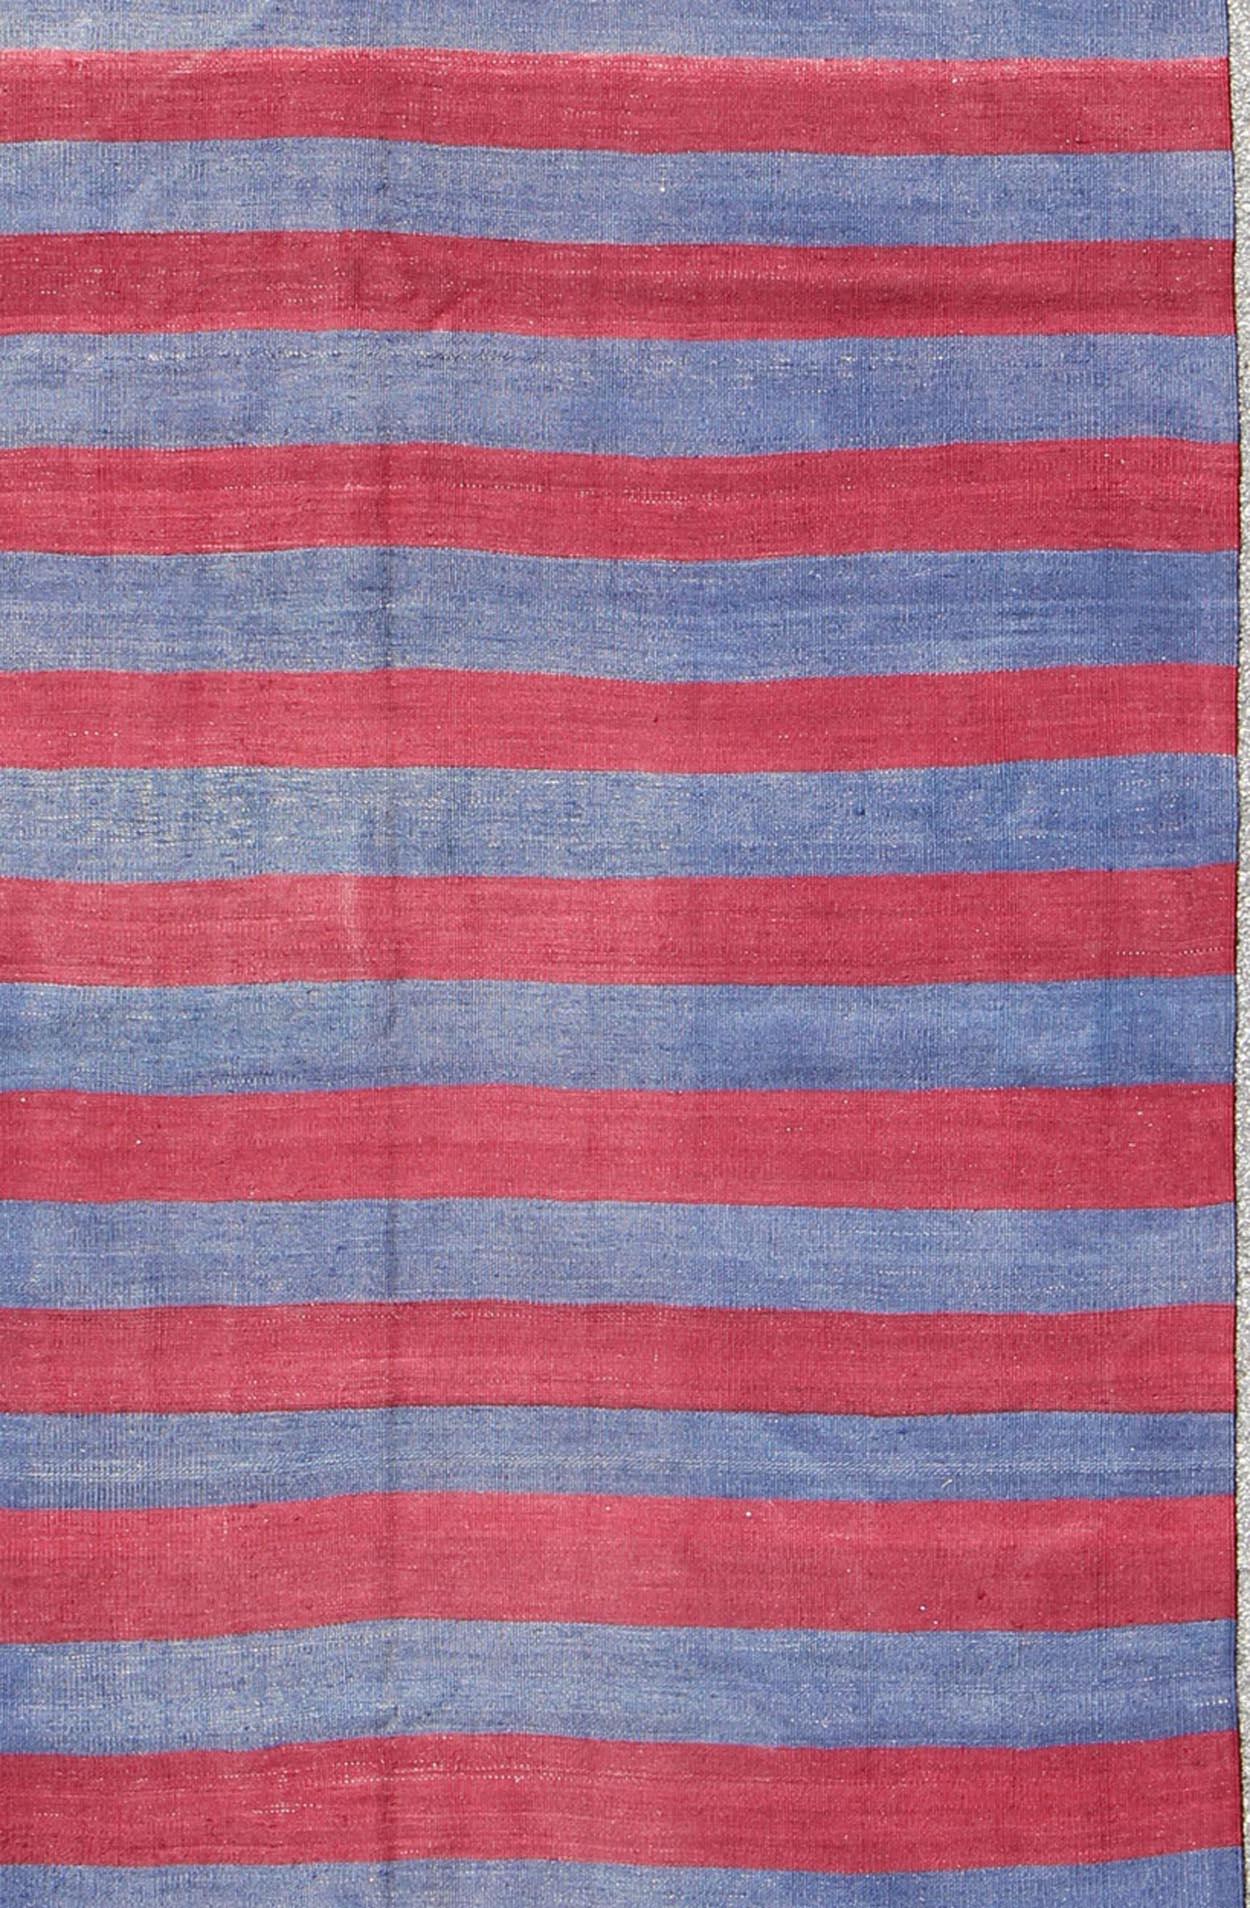 Red and blue Vintage striped Turkish Kilim suited for modern casual interiors. Kilim rug with stripes, Keivan Woven Arts / rug/ EN-165696, country of origin / type: turkey / Kilim, circa mid-20th century. 
Featuring a repeating horizontal stripe